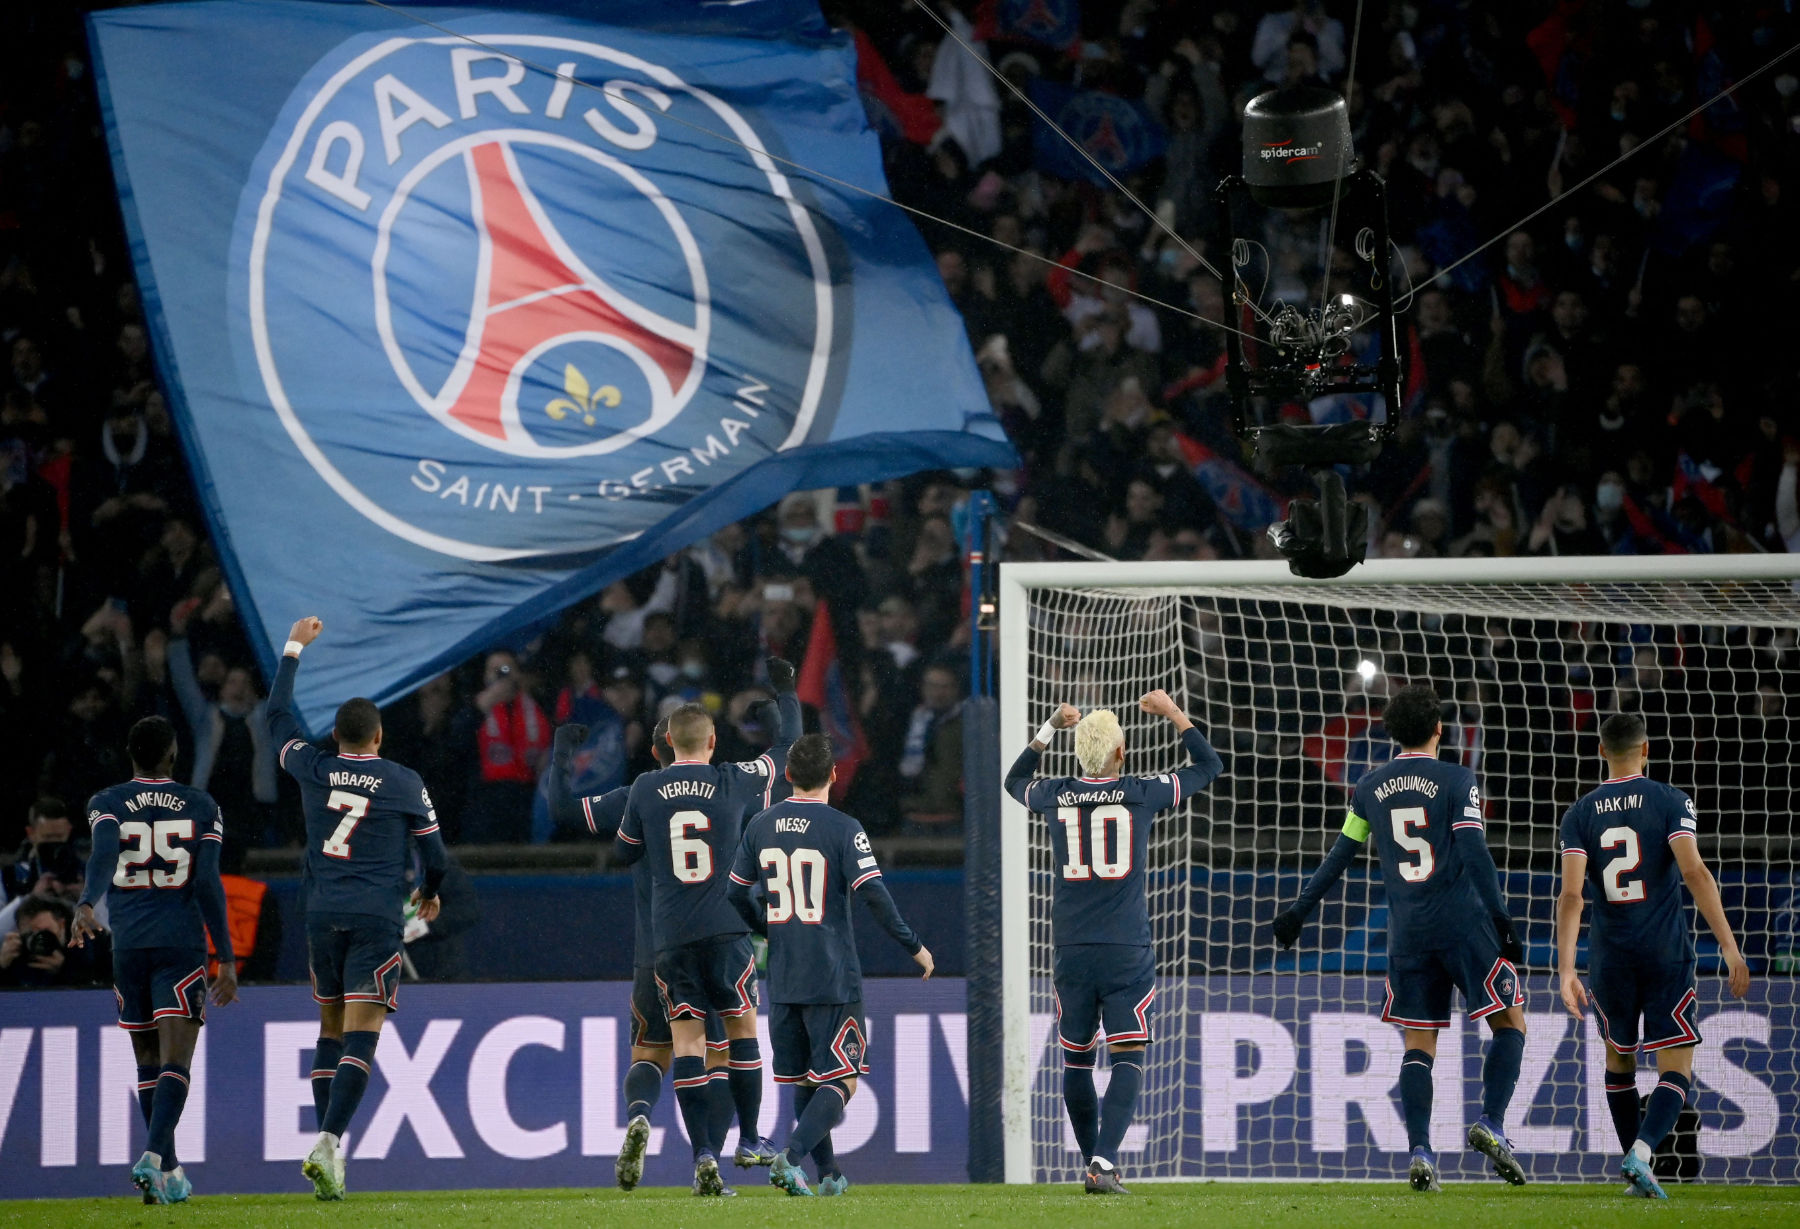 Will This Be the Year PSG Achieves Champions League Glory? - PSG Talk